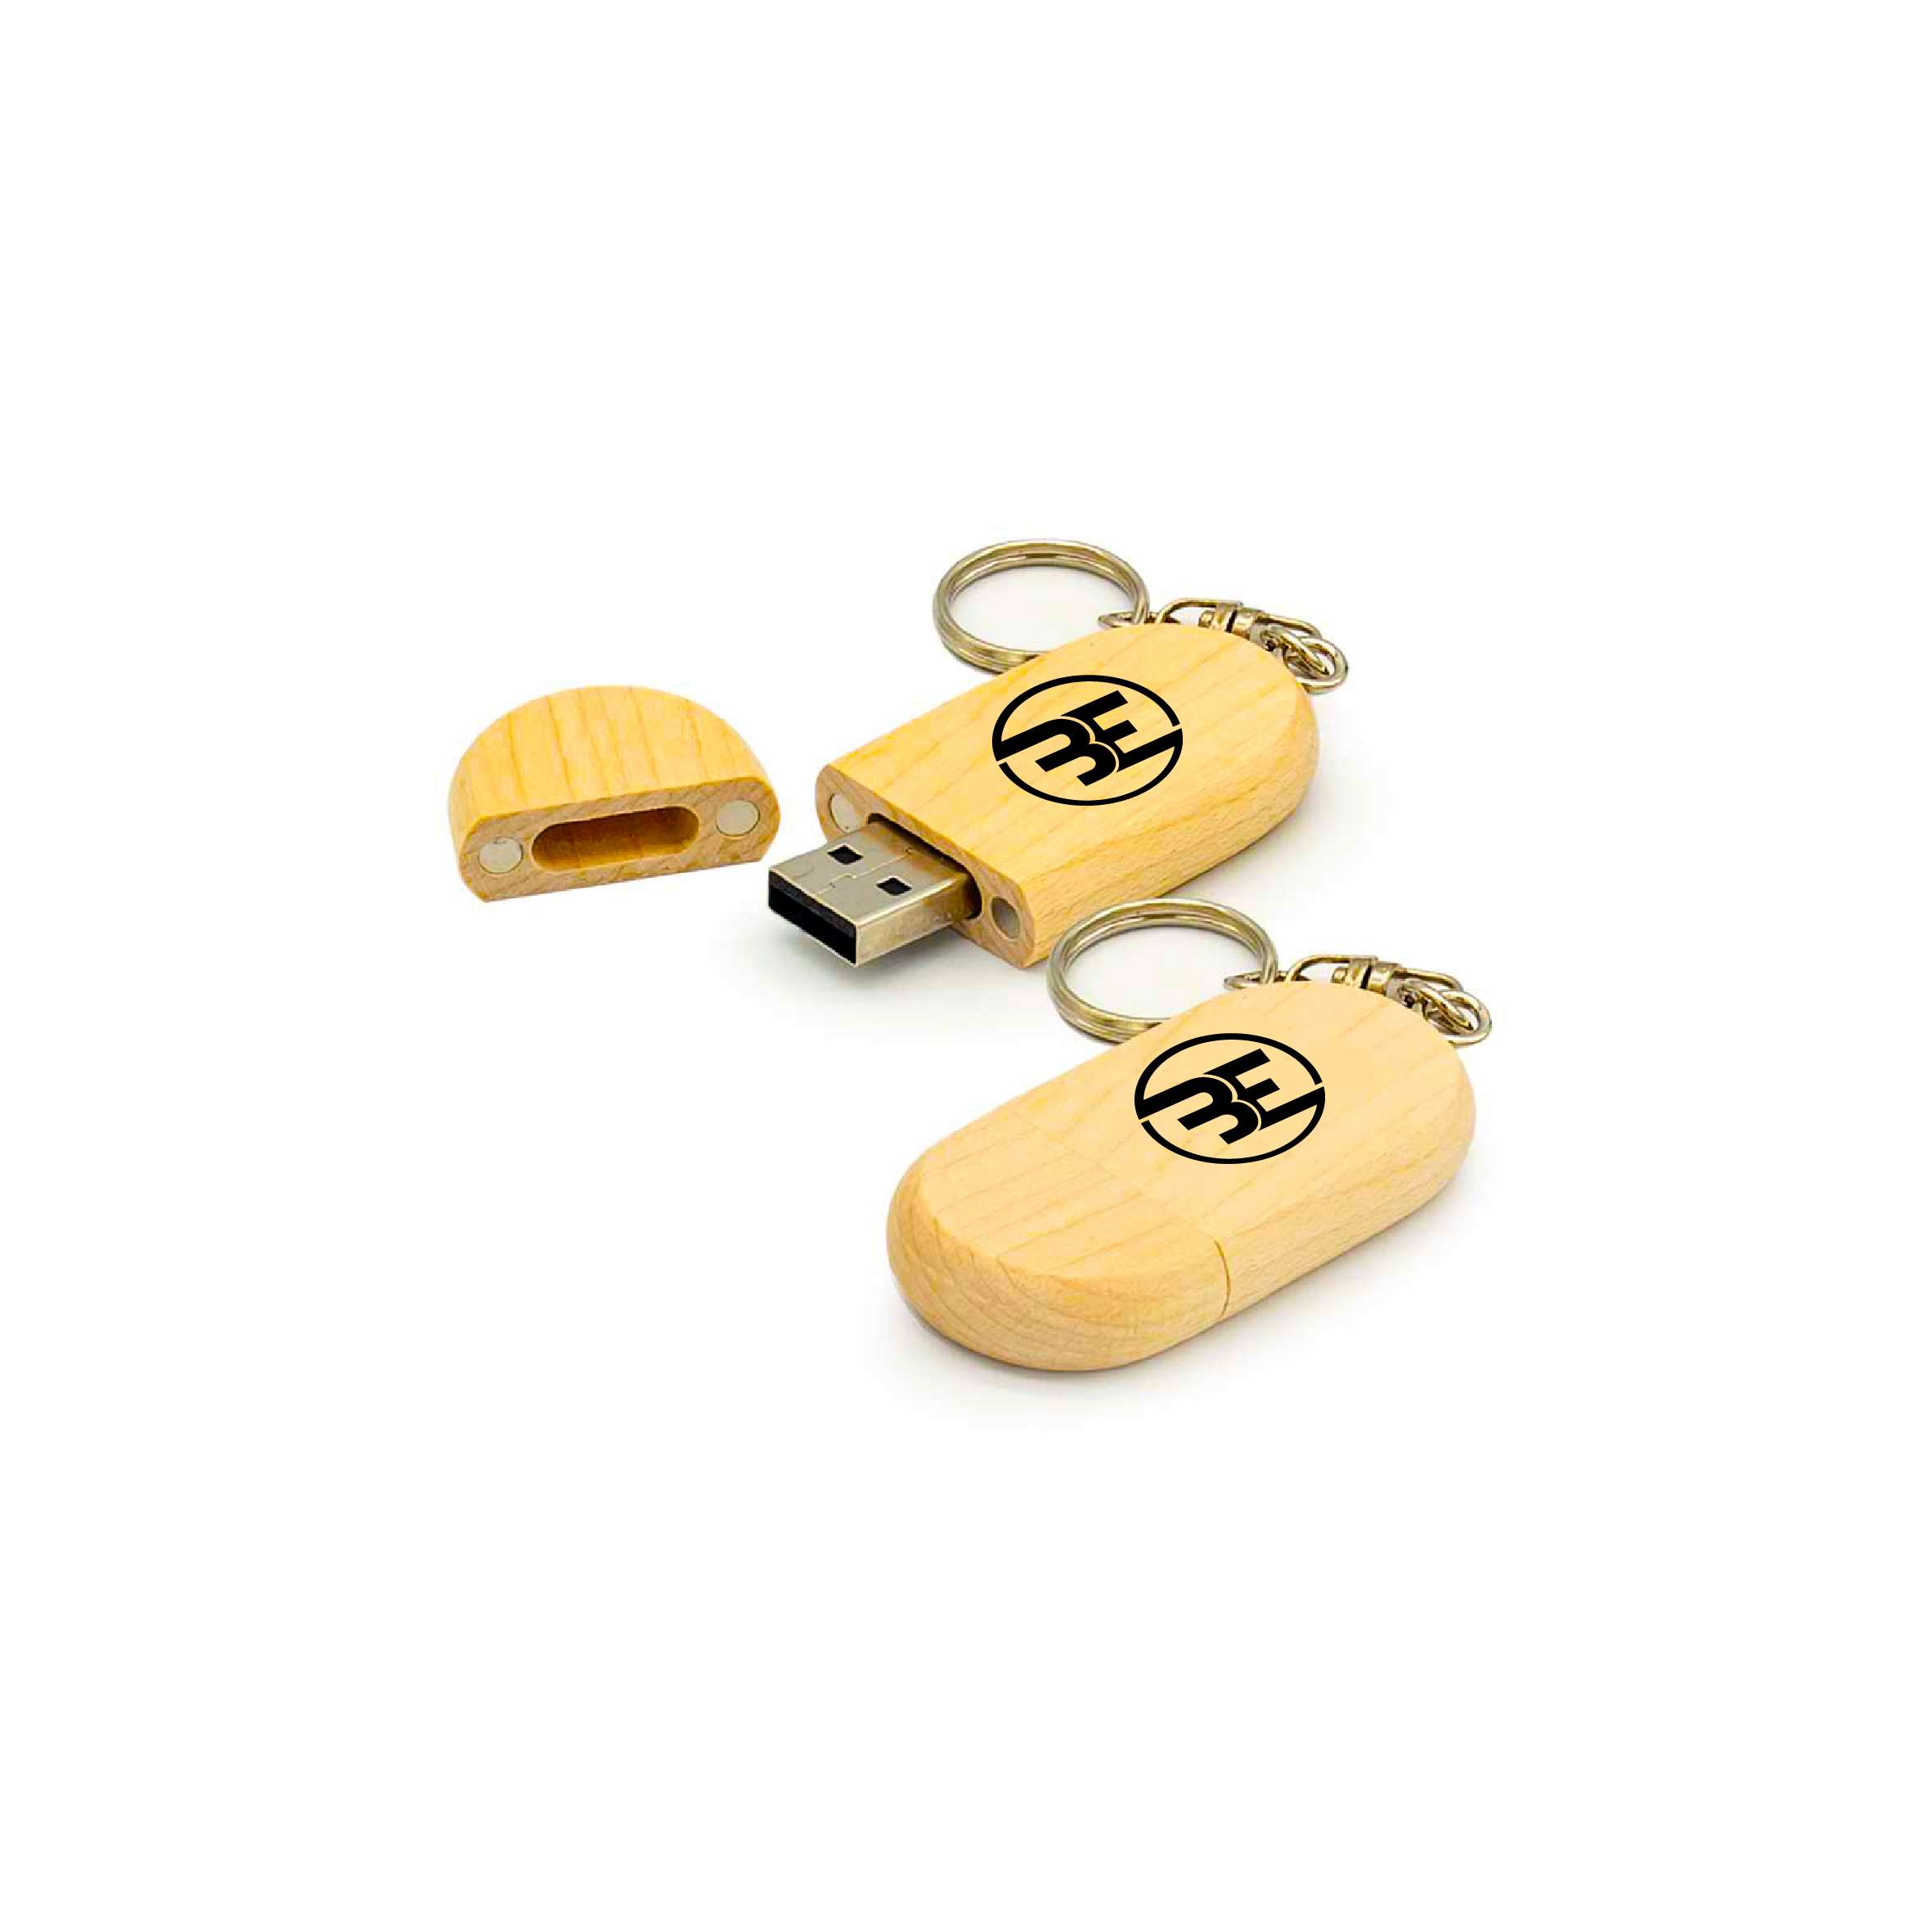 Wooden USB With Key Chain